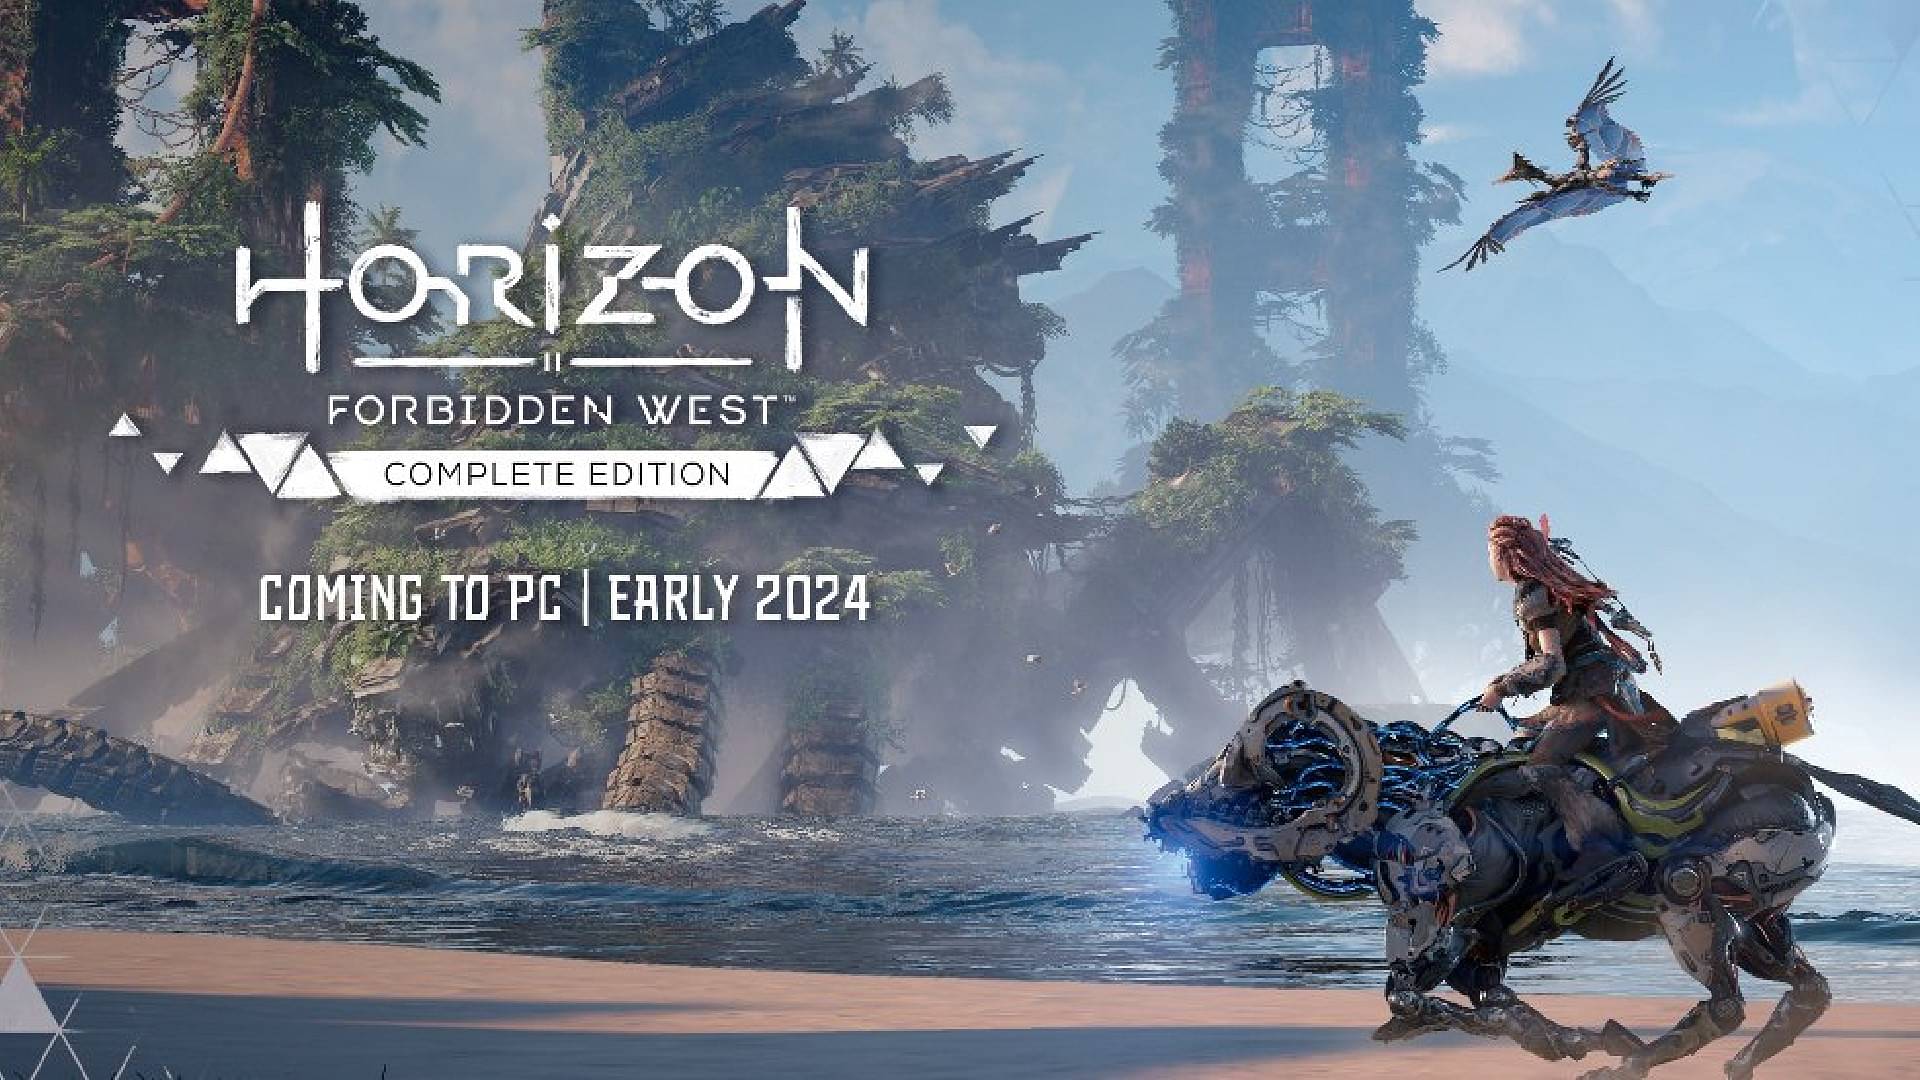 Horizon Forbidden West is coming to PC early 2024. Follow @pcgaming to stay  updated.